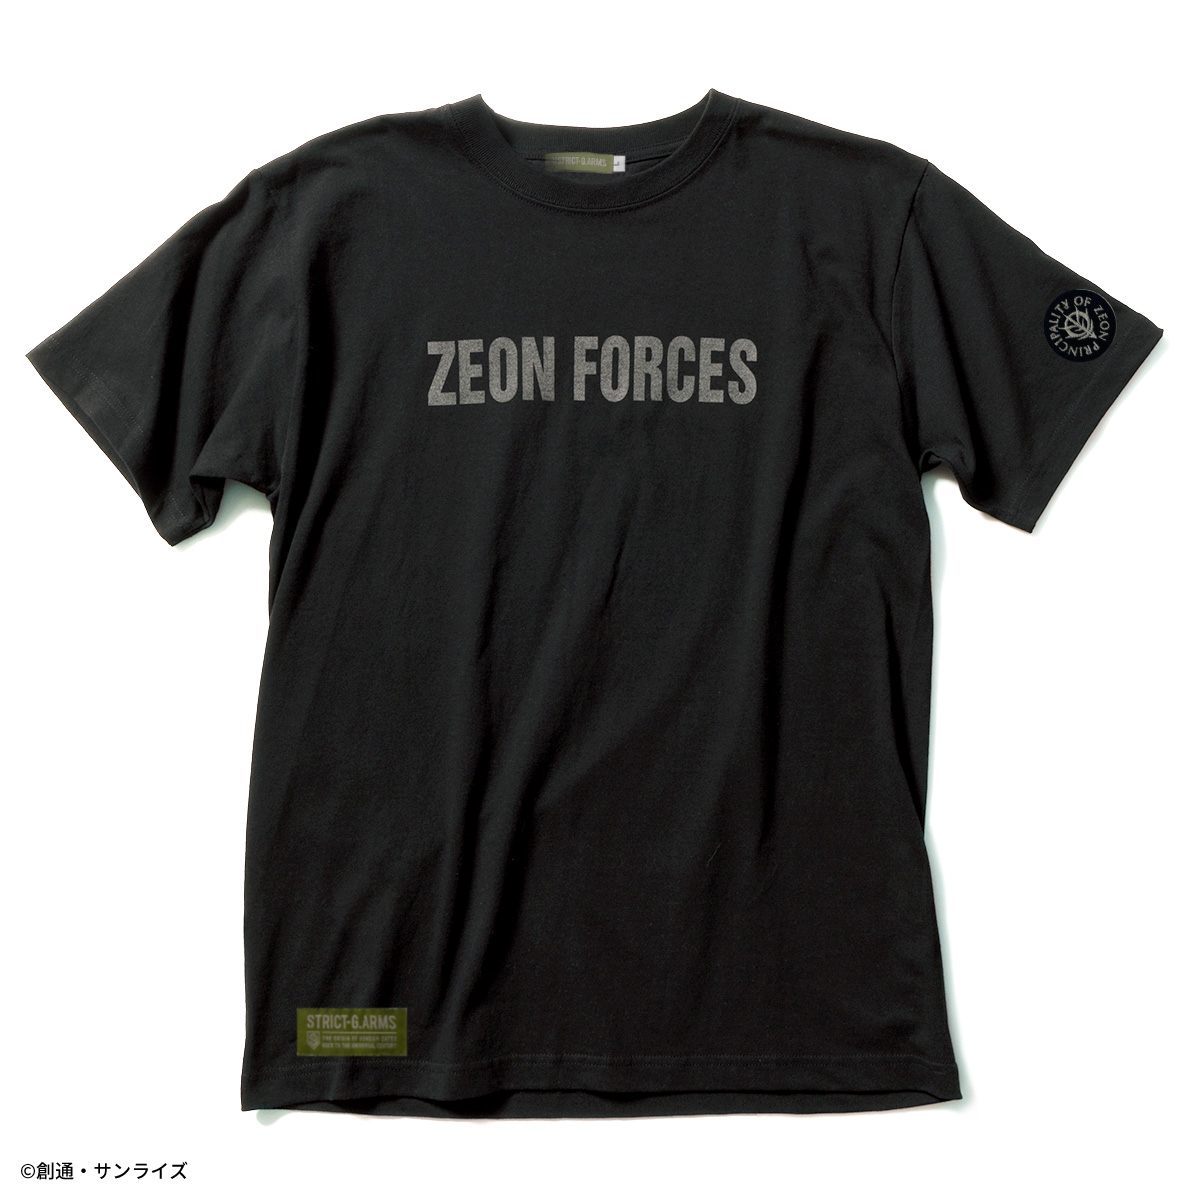 STRICT-G.ARMS『機動戦士ガンダム』半袖Tシャツ リフレクタープリント ZEON FORCES